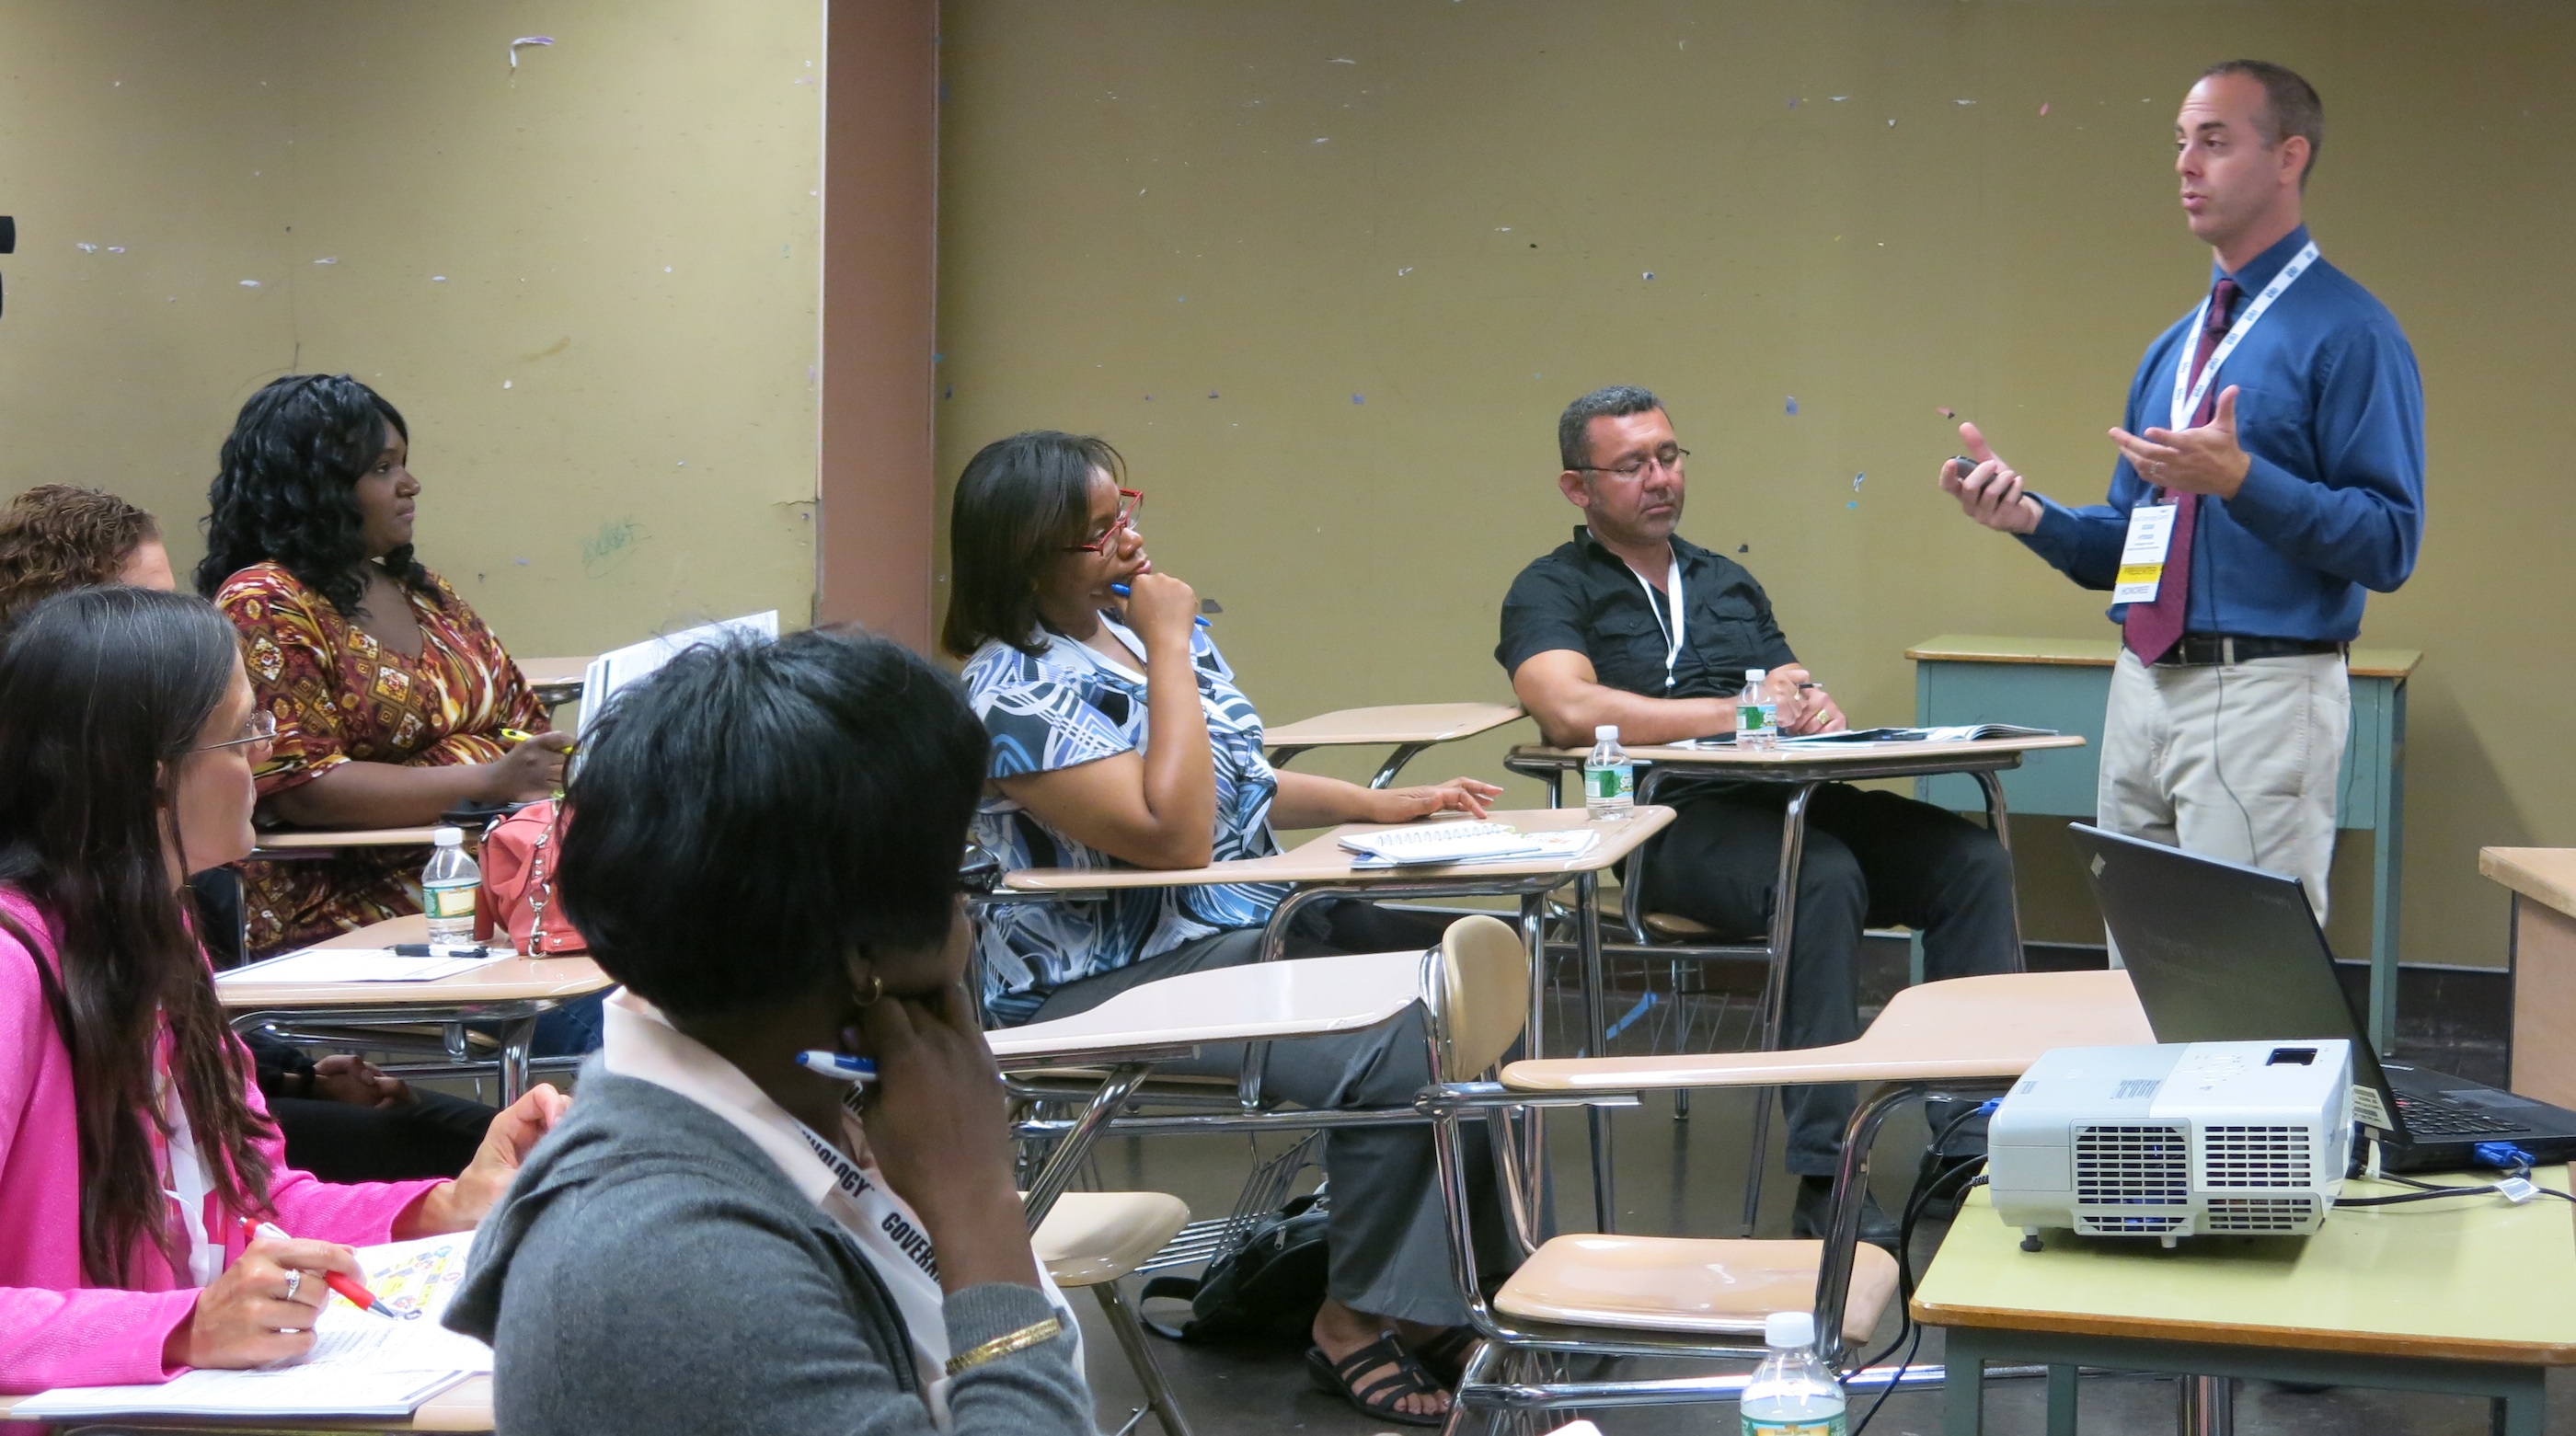 Teacher Adam Hyman introduced the flipped classroom teaching model at a professional development session Wednesday.